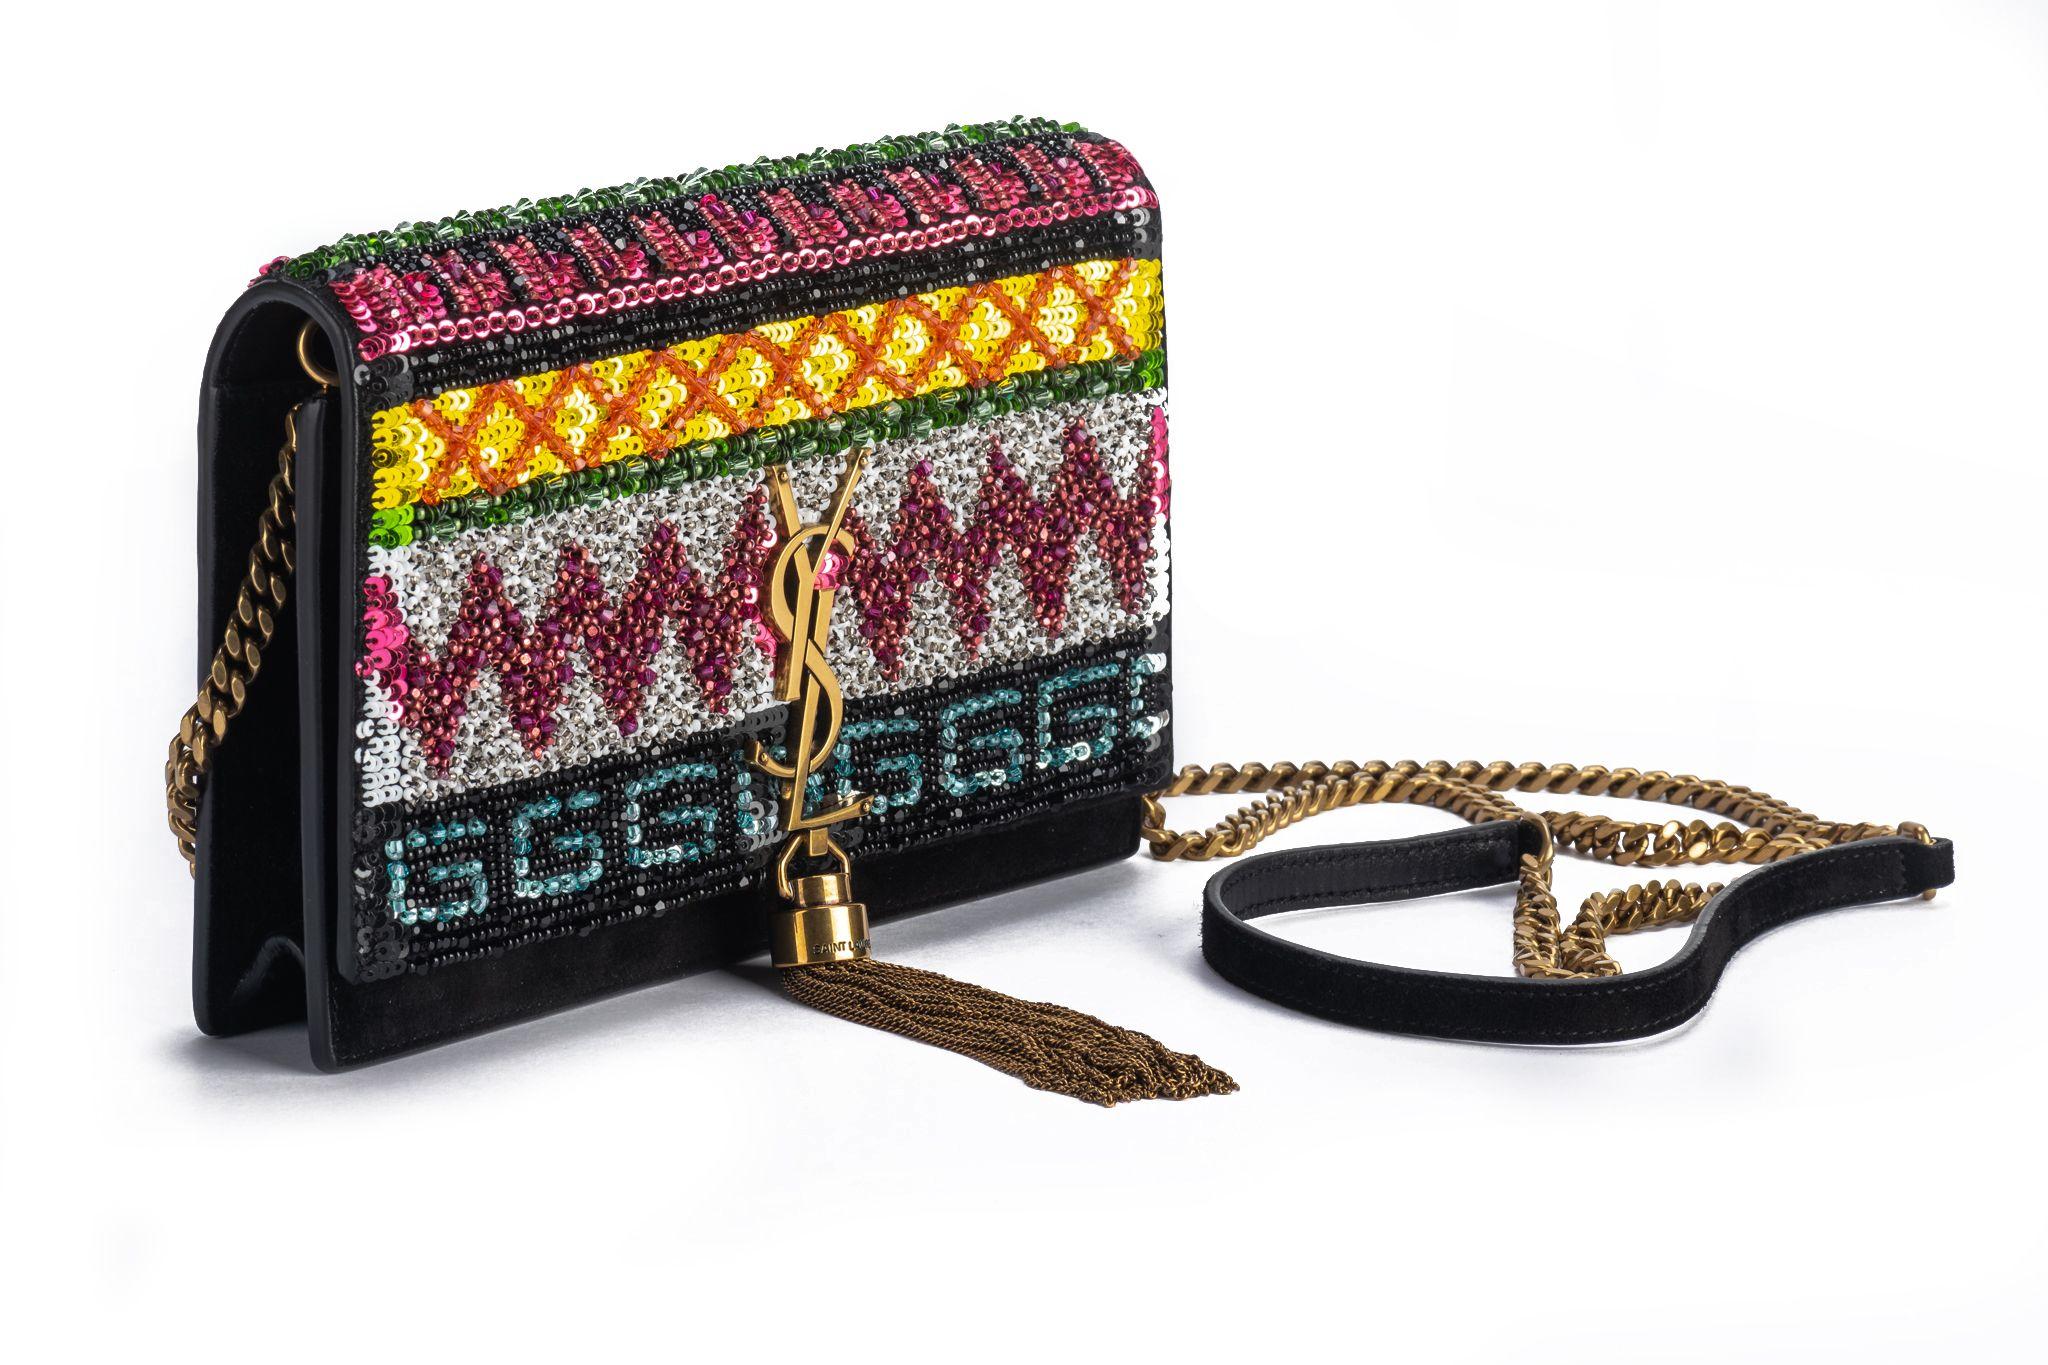 YSL brand new black suede cross body bag with multicolor sequins beading, gold tone tassel . Shoulder drop 23. Original retail $2980. Comes with original dust cover.